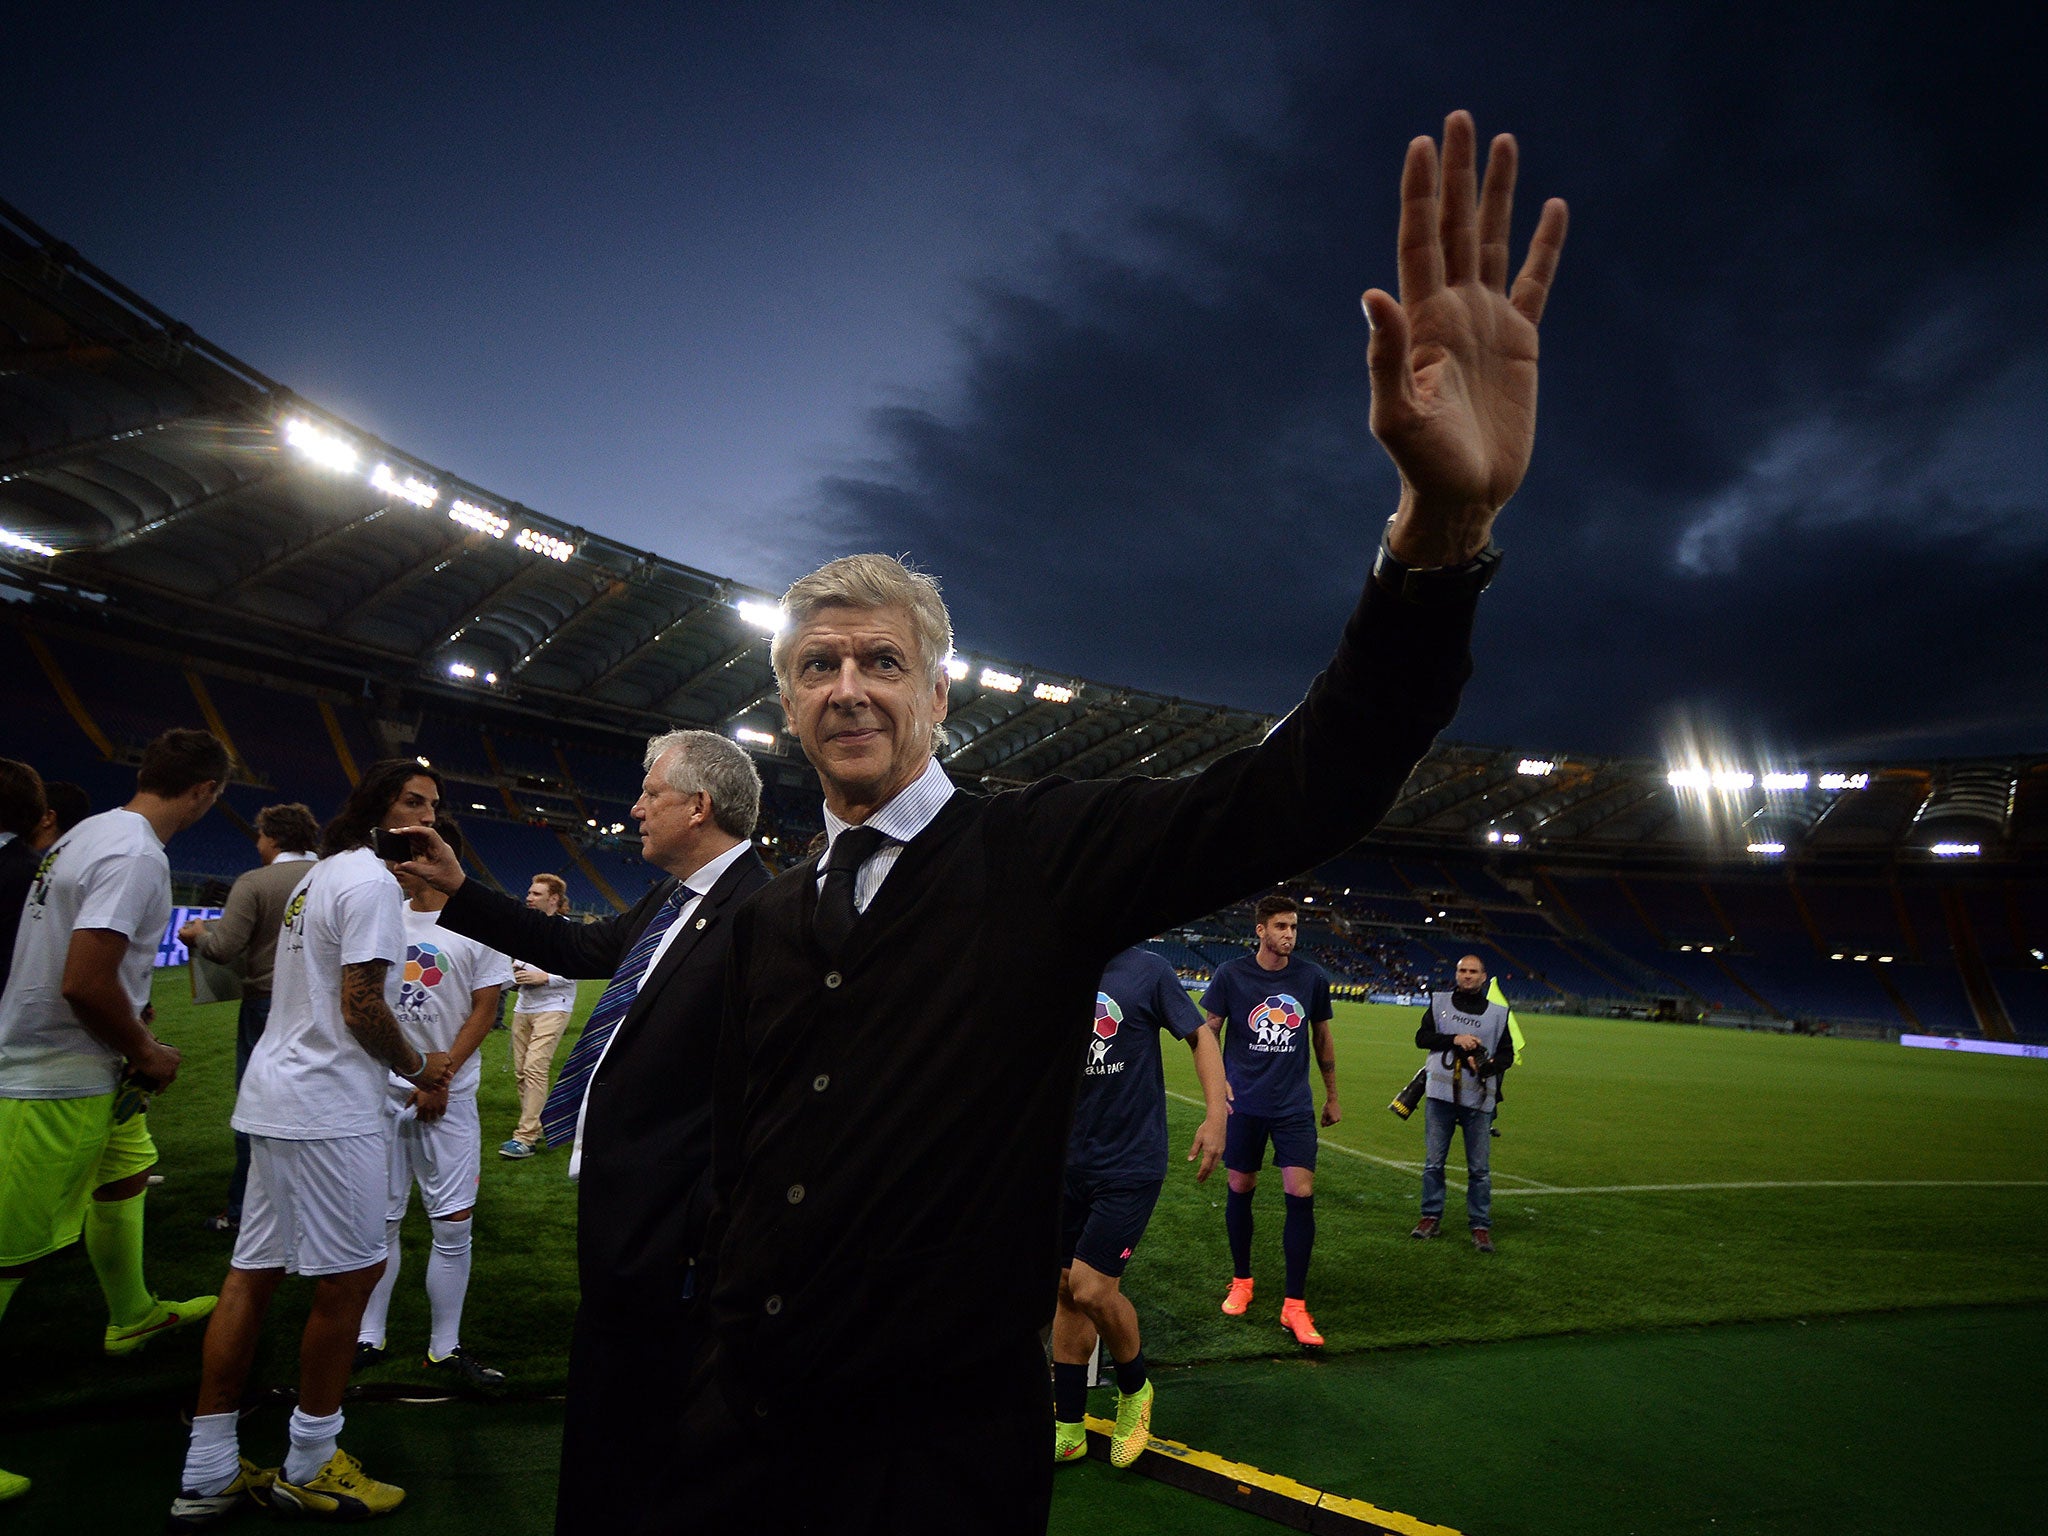 Arsène Wenger arrives for the inter religious 'match for peace' football game in Rome's Olympic Stadium tonight